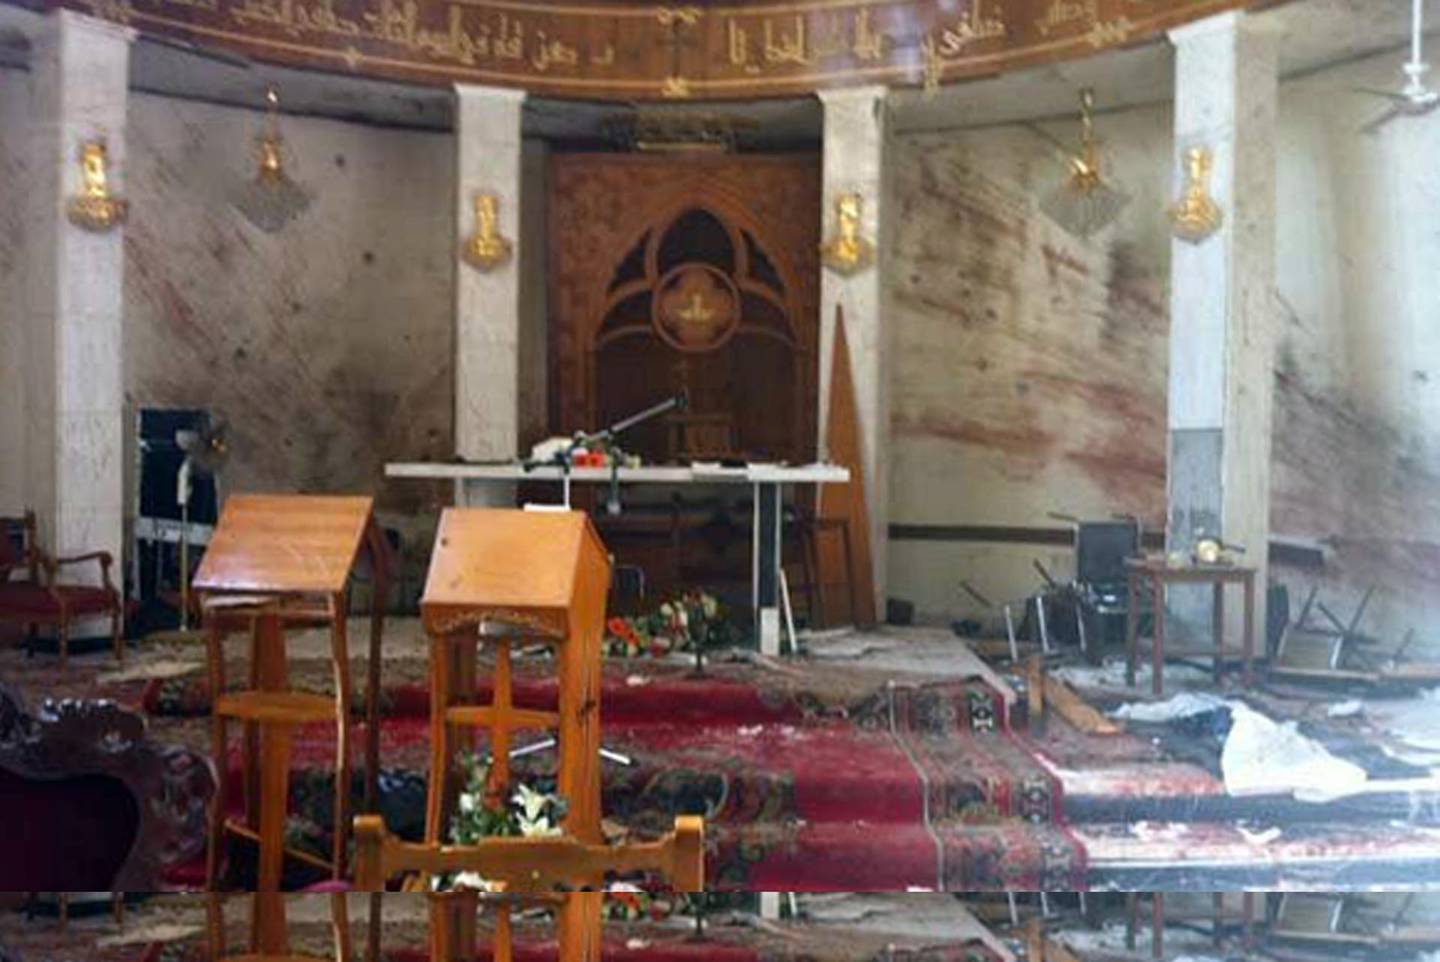 FILE - In this mobile phone camera image obtained by the Associated Press taken Nov. 2, 2010 file photo, the interior of the Our Lady of Salvation church is seen after gunmen took the congregation hostage on Sunday Oct. 31, in Baghdad, Iraq. Iraq has arrested at least 12 suspected al-Qaida insurgents believed to be behind a deadly Baghdad church siege a month ago, the country's interior minister told The Associated Press on Saturday Nov. 27, 2010. The siege ended with 68 people dead. (AP Photo, File)